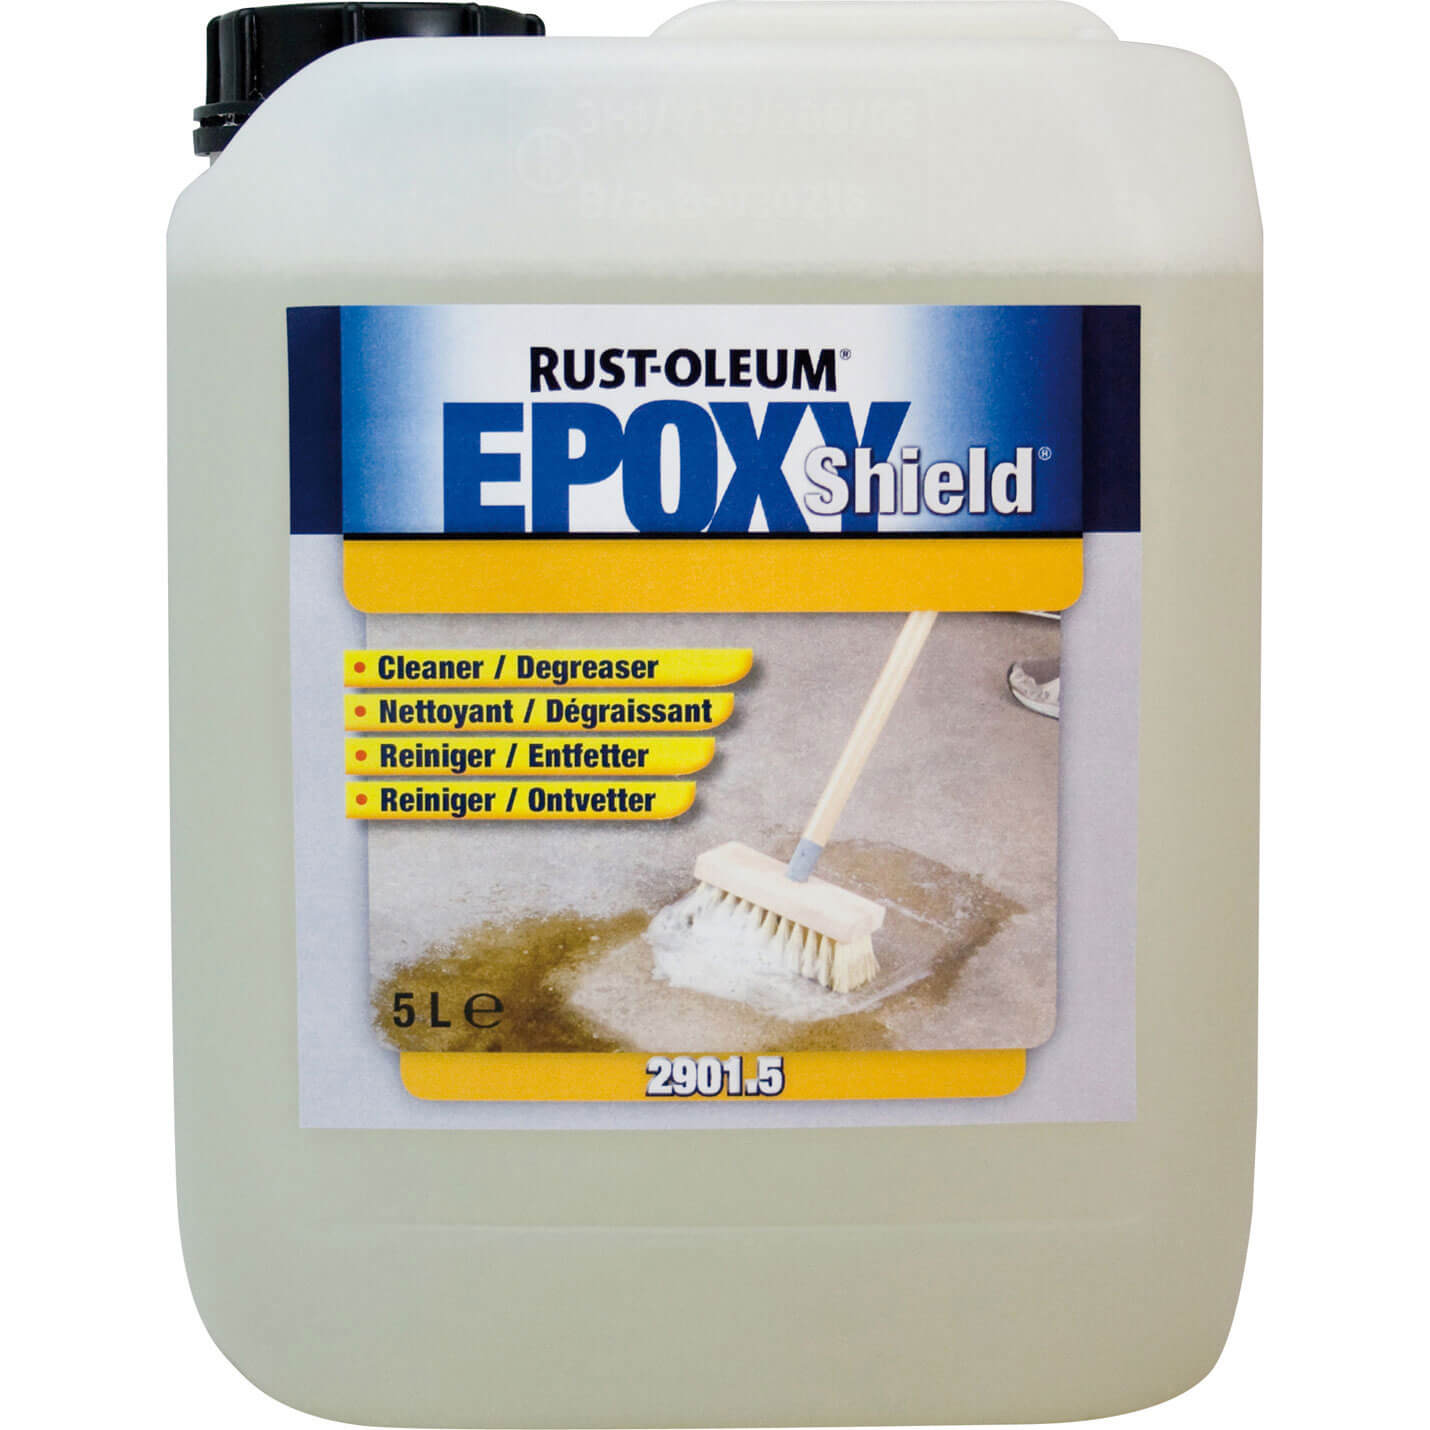 Image of Rust Oleum Epoxy Shield Floor Cleaner and Degreaser 5l